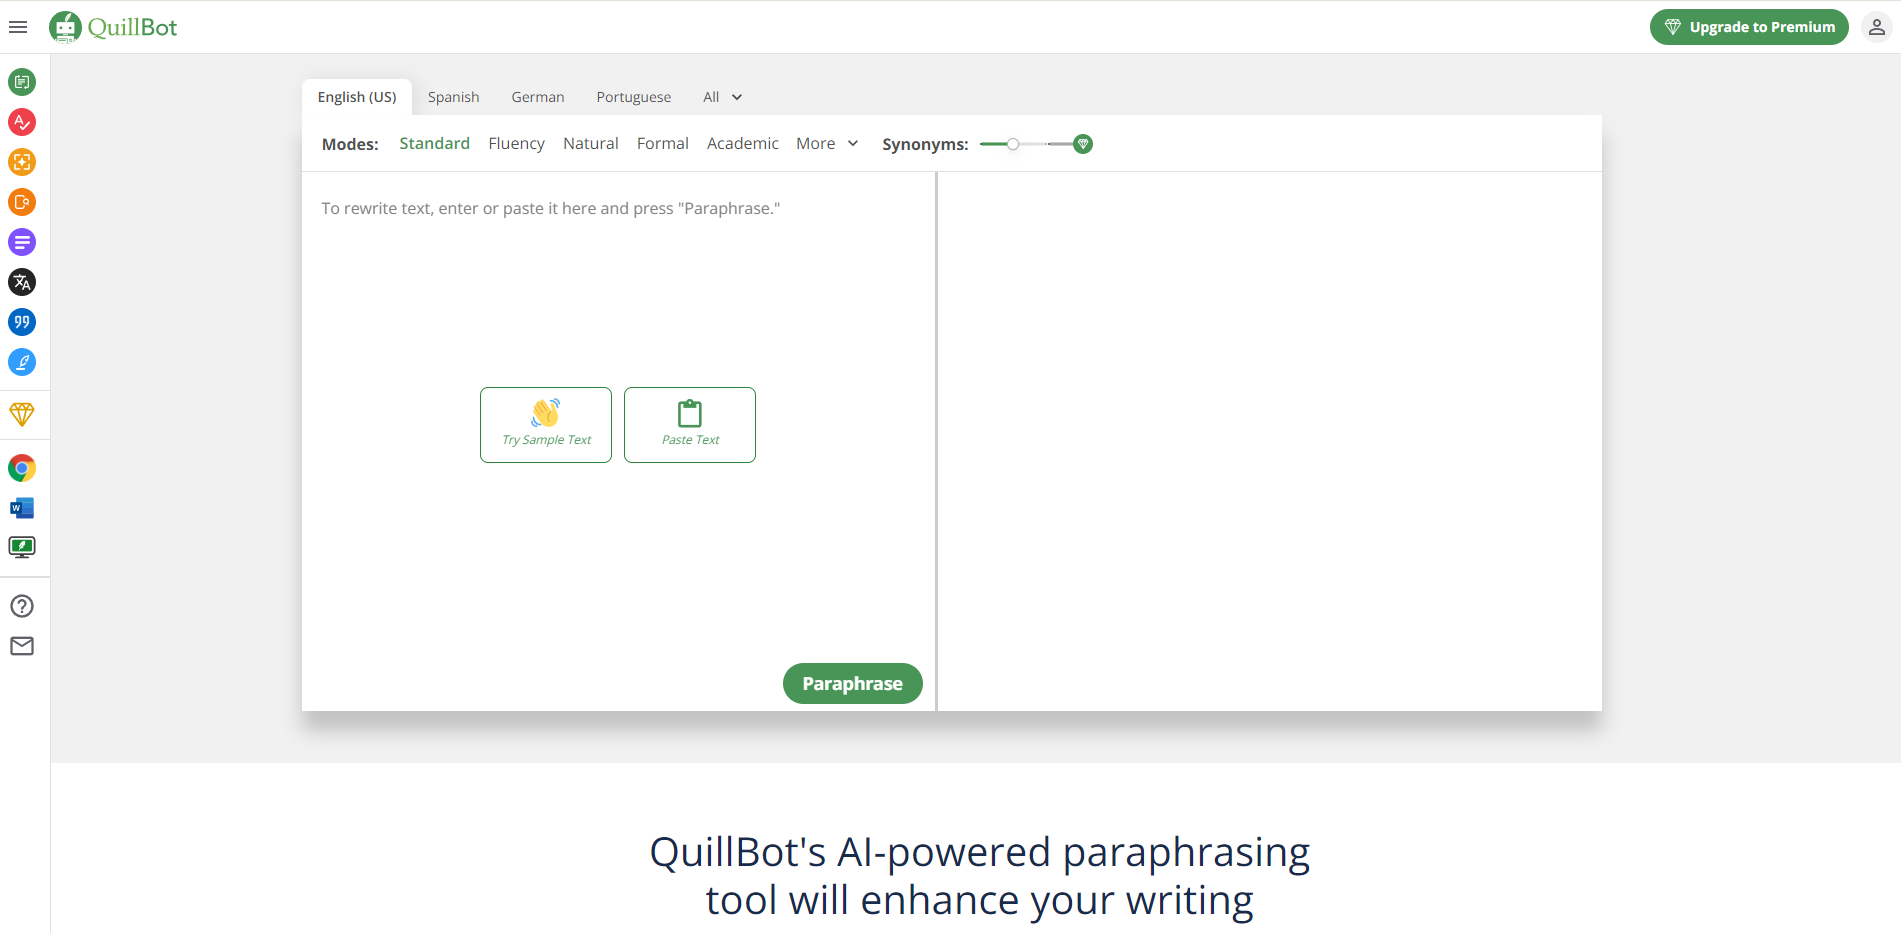 QuillBot, renowned for its advanced paraphrasing and summarization capabilities, stands out as a key tool in enhancing students’ writing and research skills